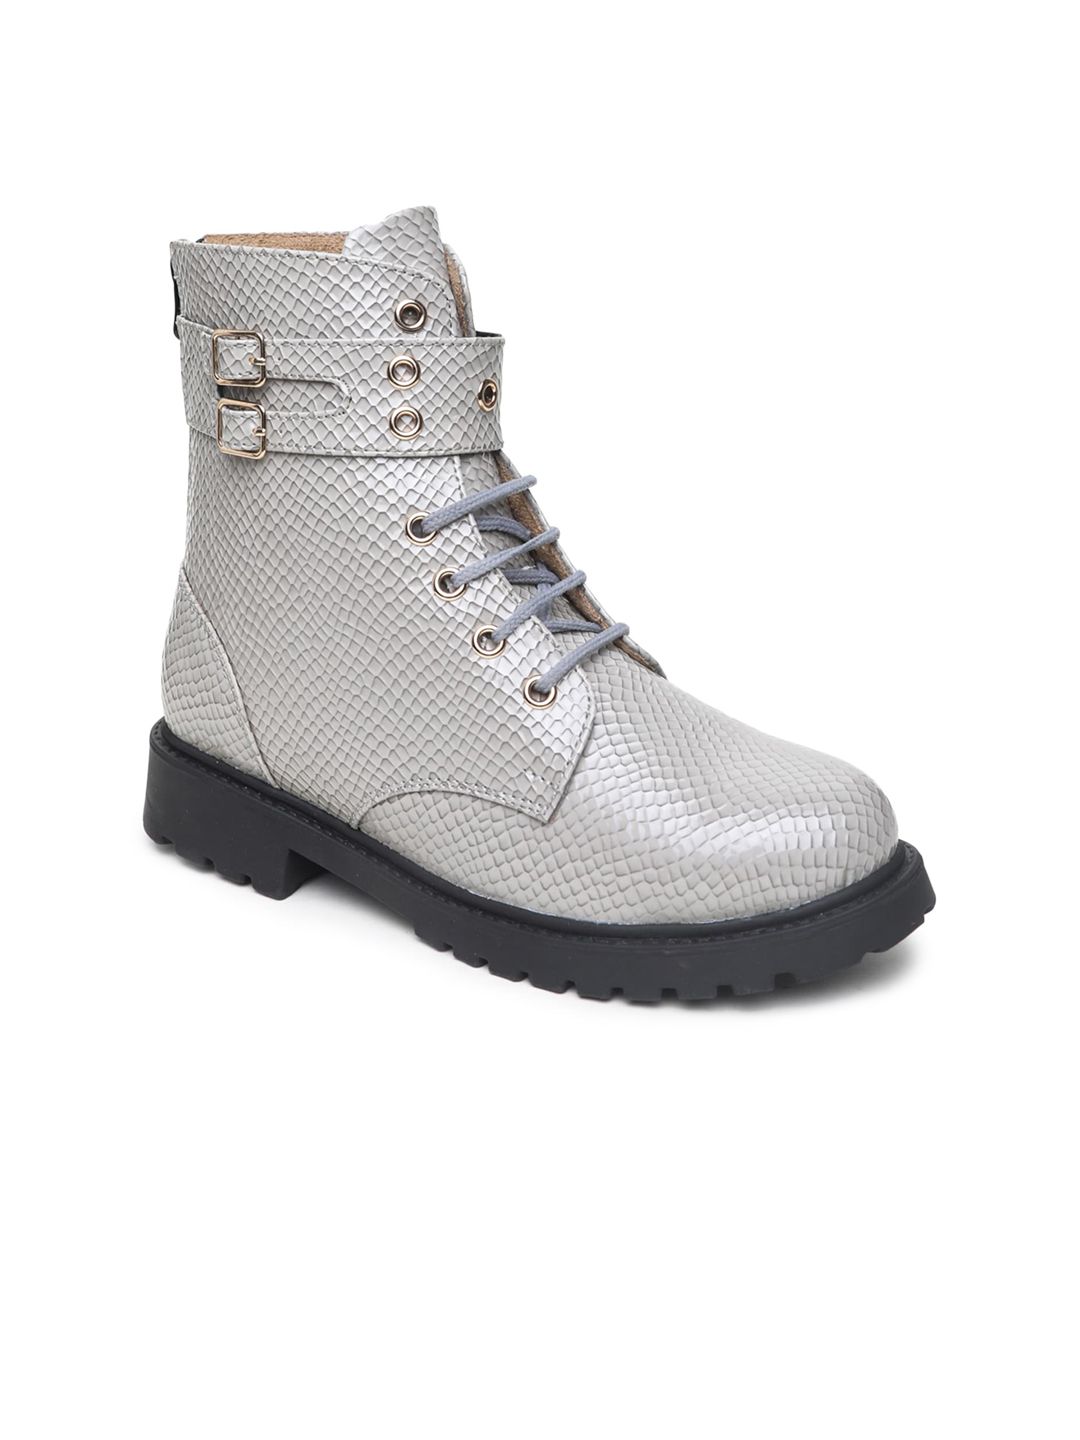 VALIOSAA Grey Printed High-Top Wedge Heeled Boots with Buckles Price in India